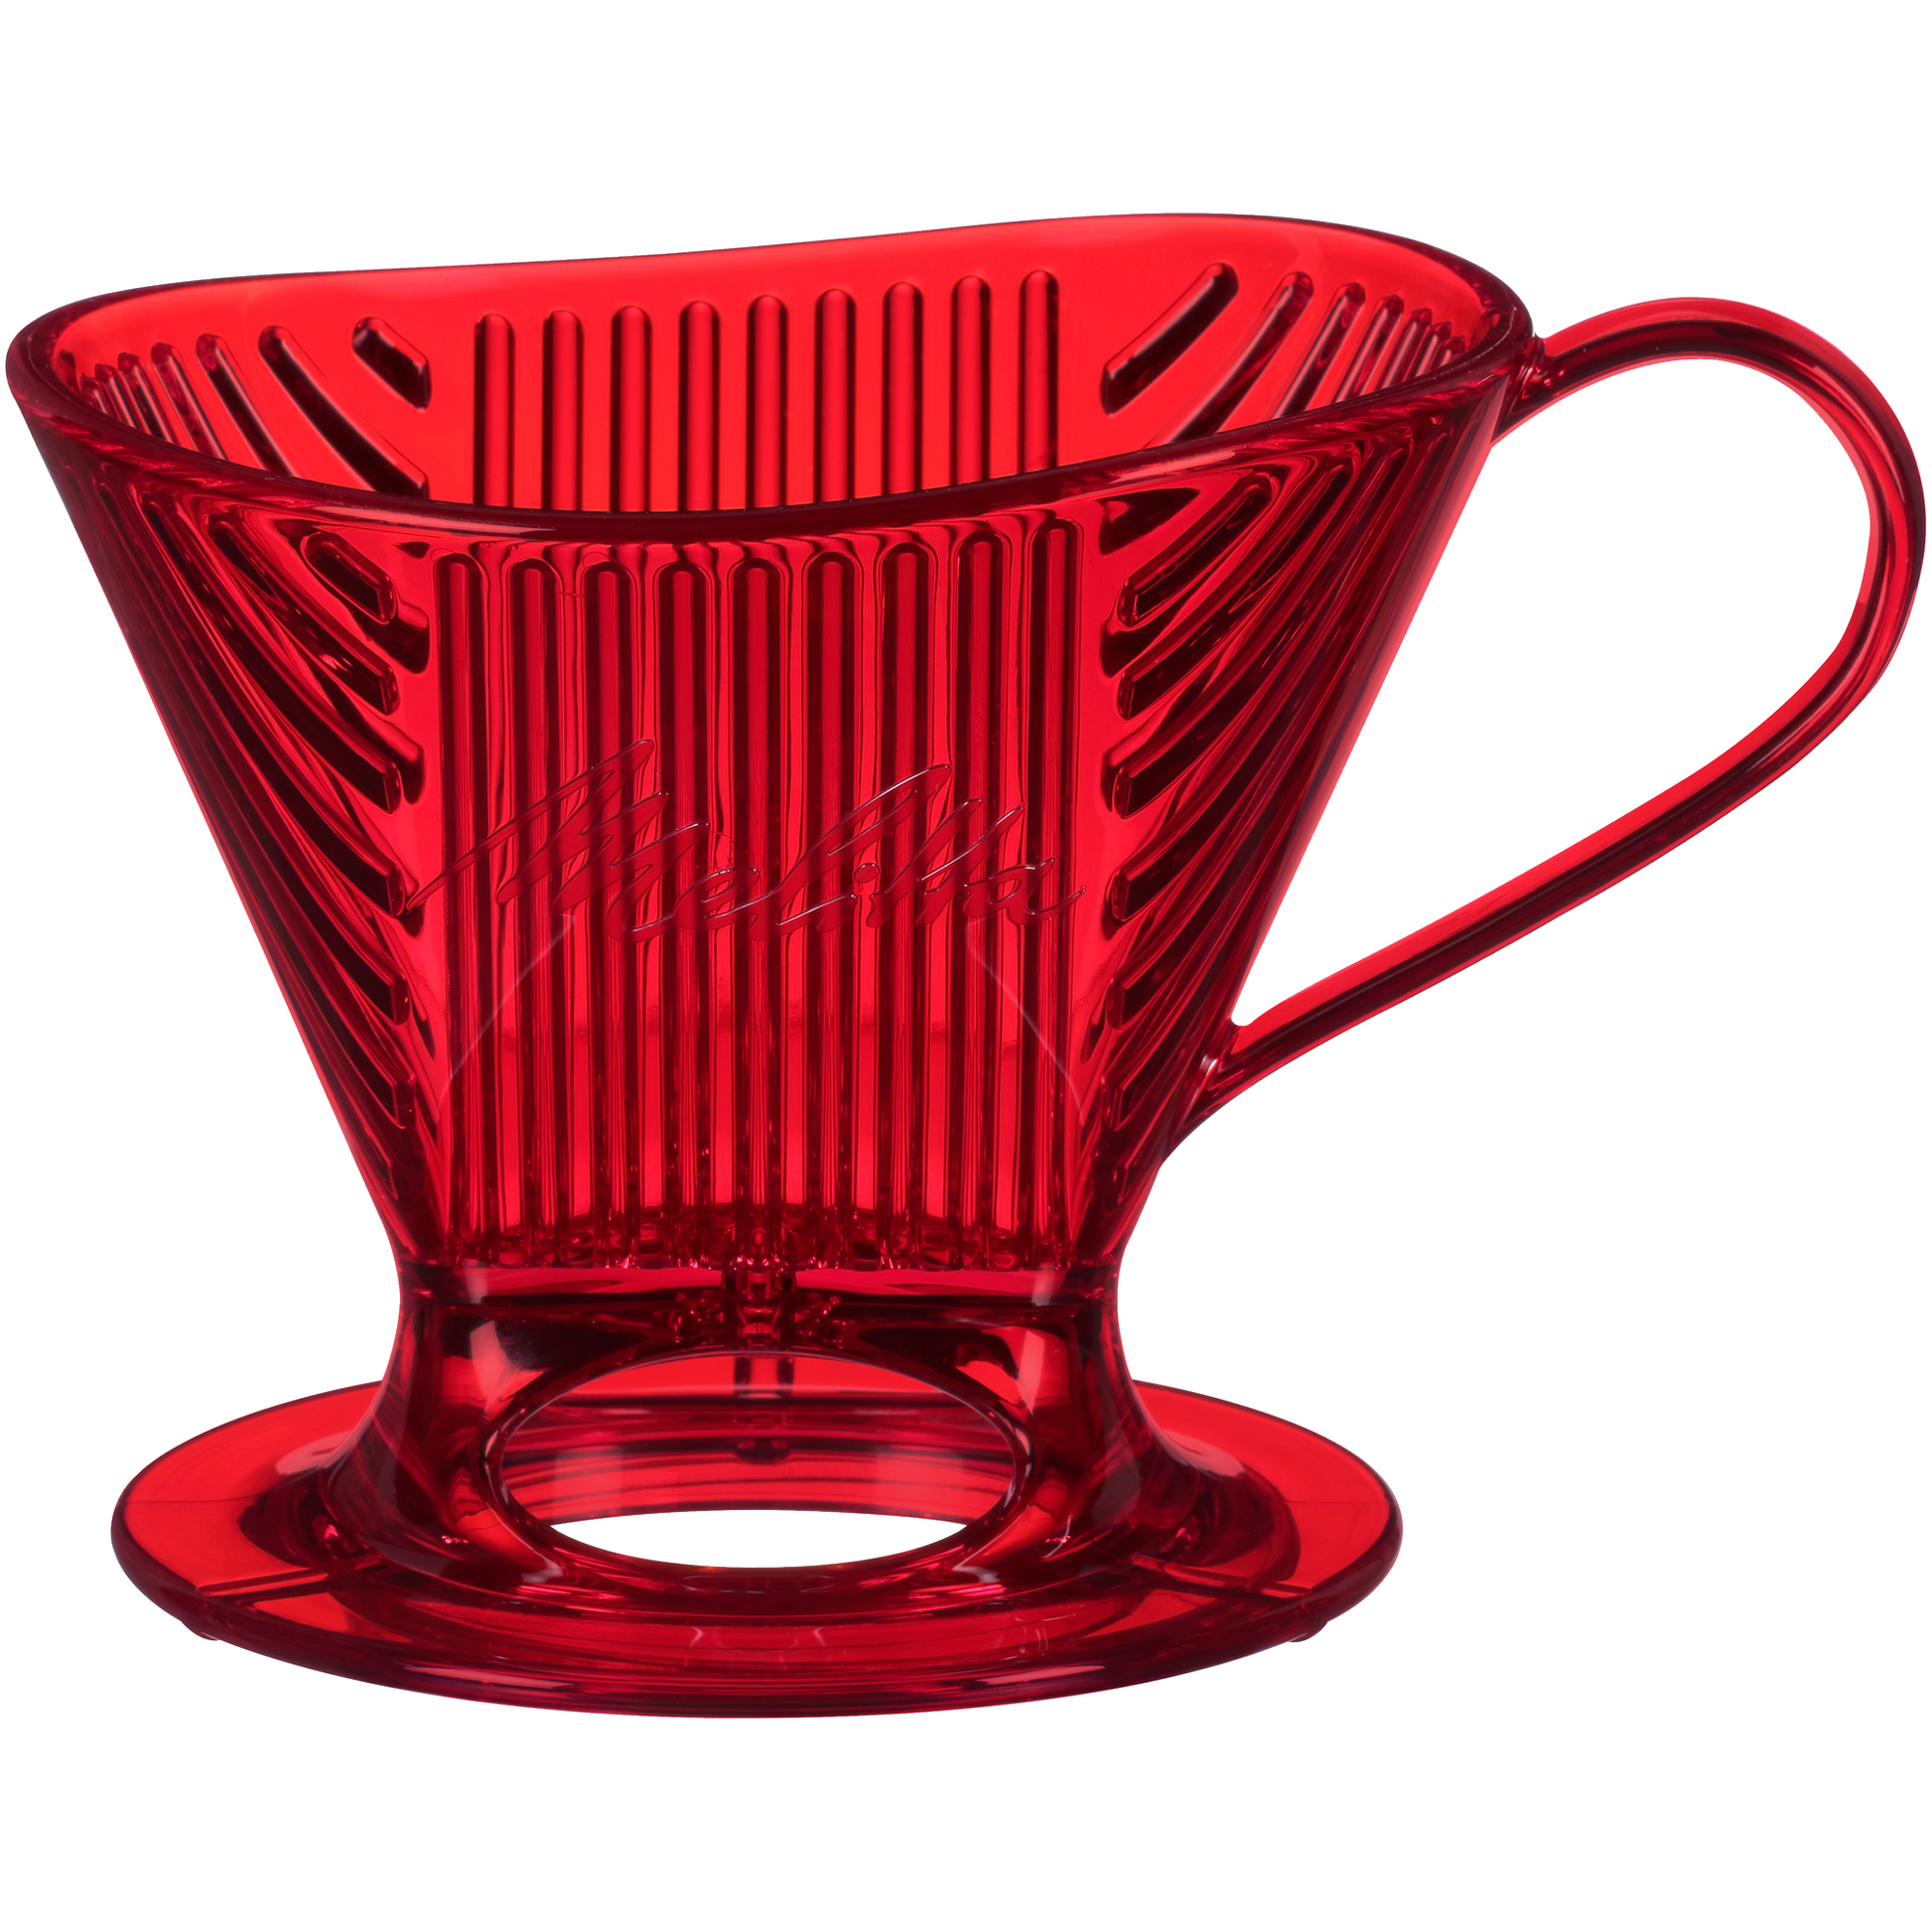 Melitta 6 Cup Glass Pour Over Coffee Brewer